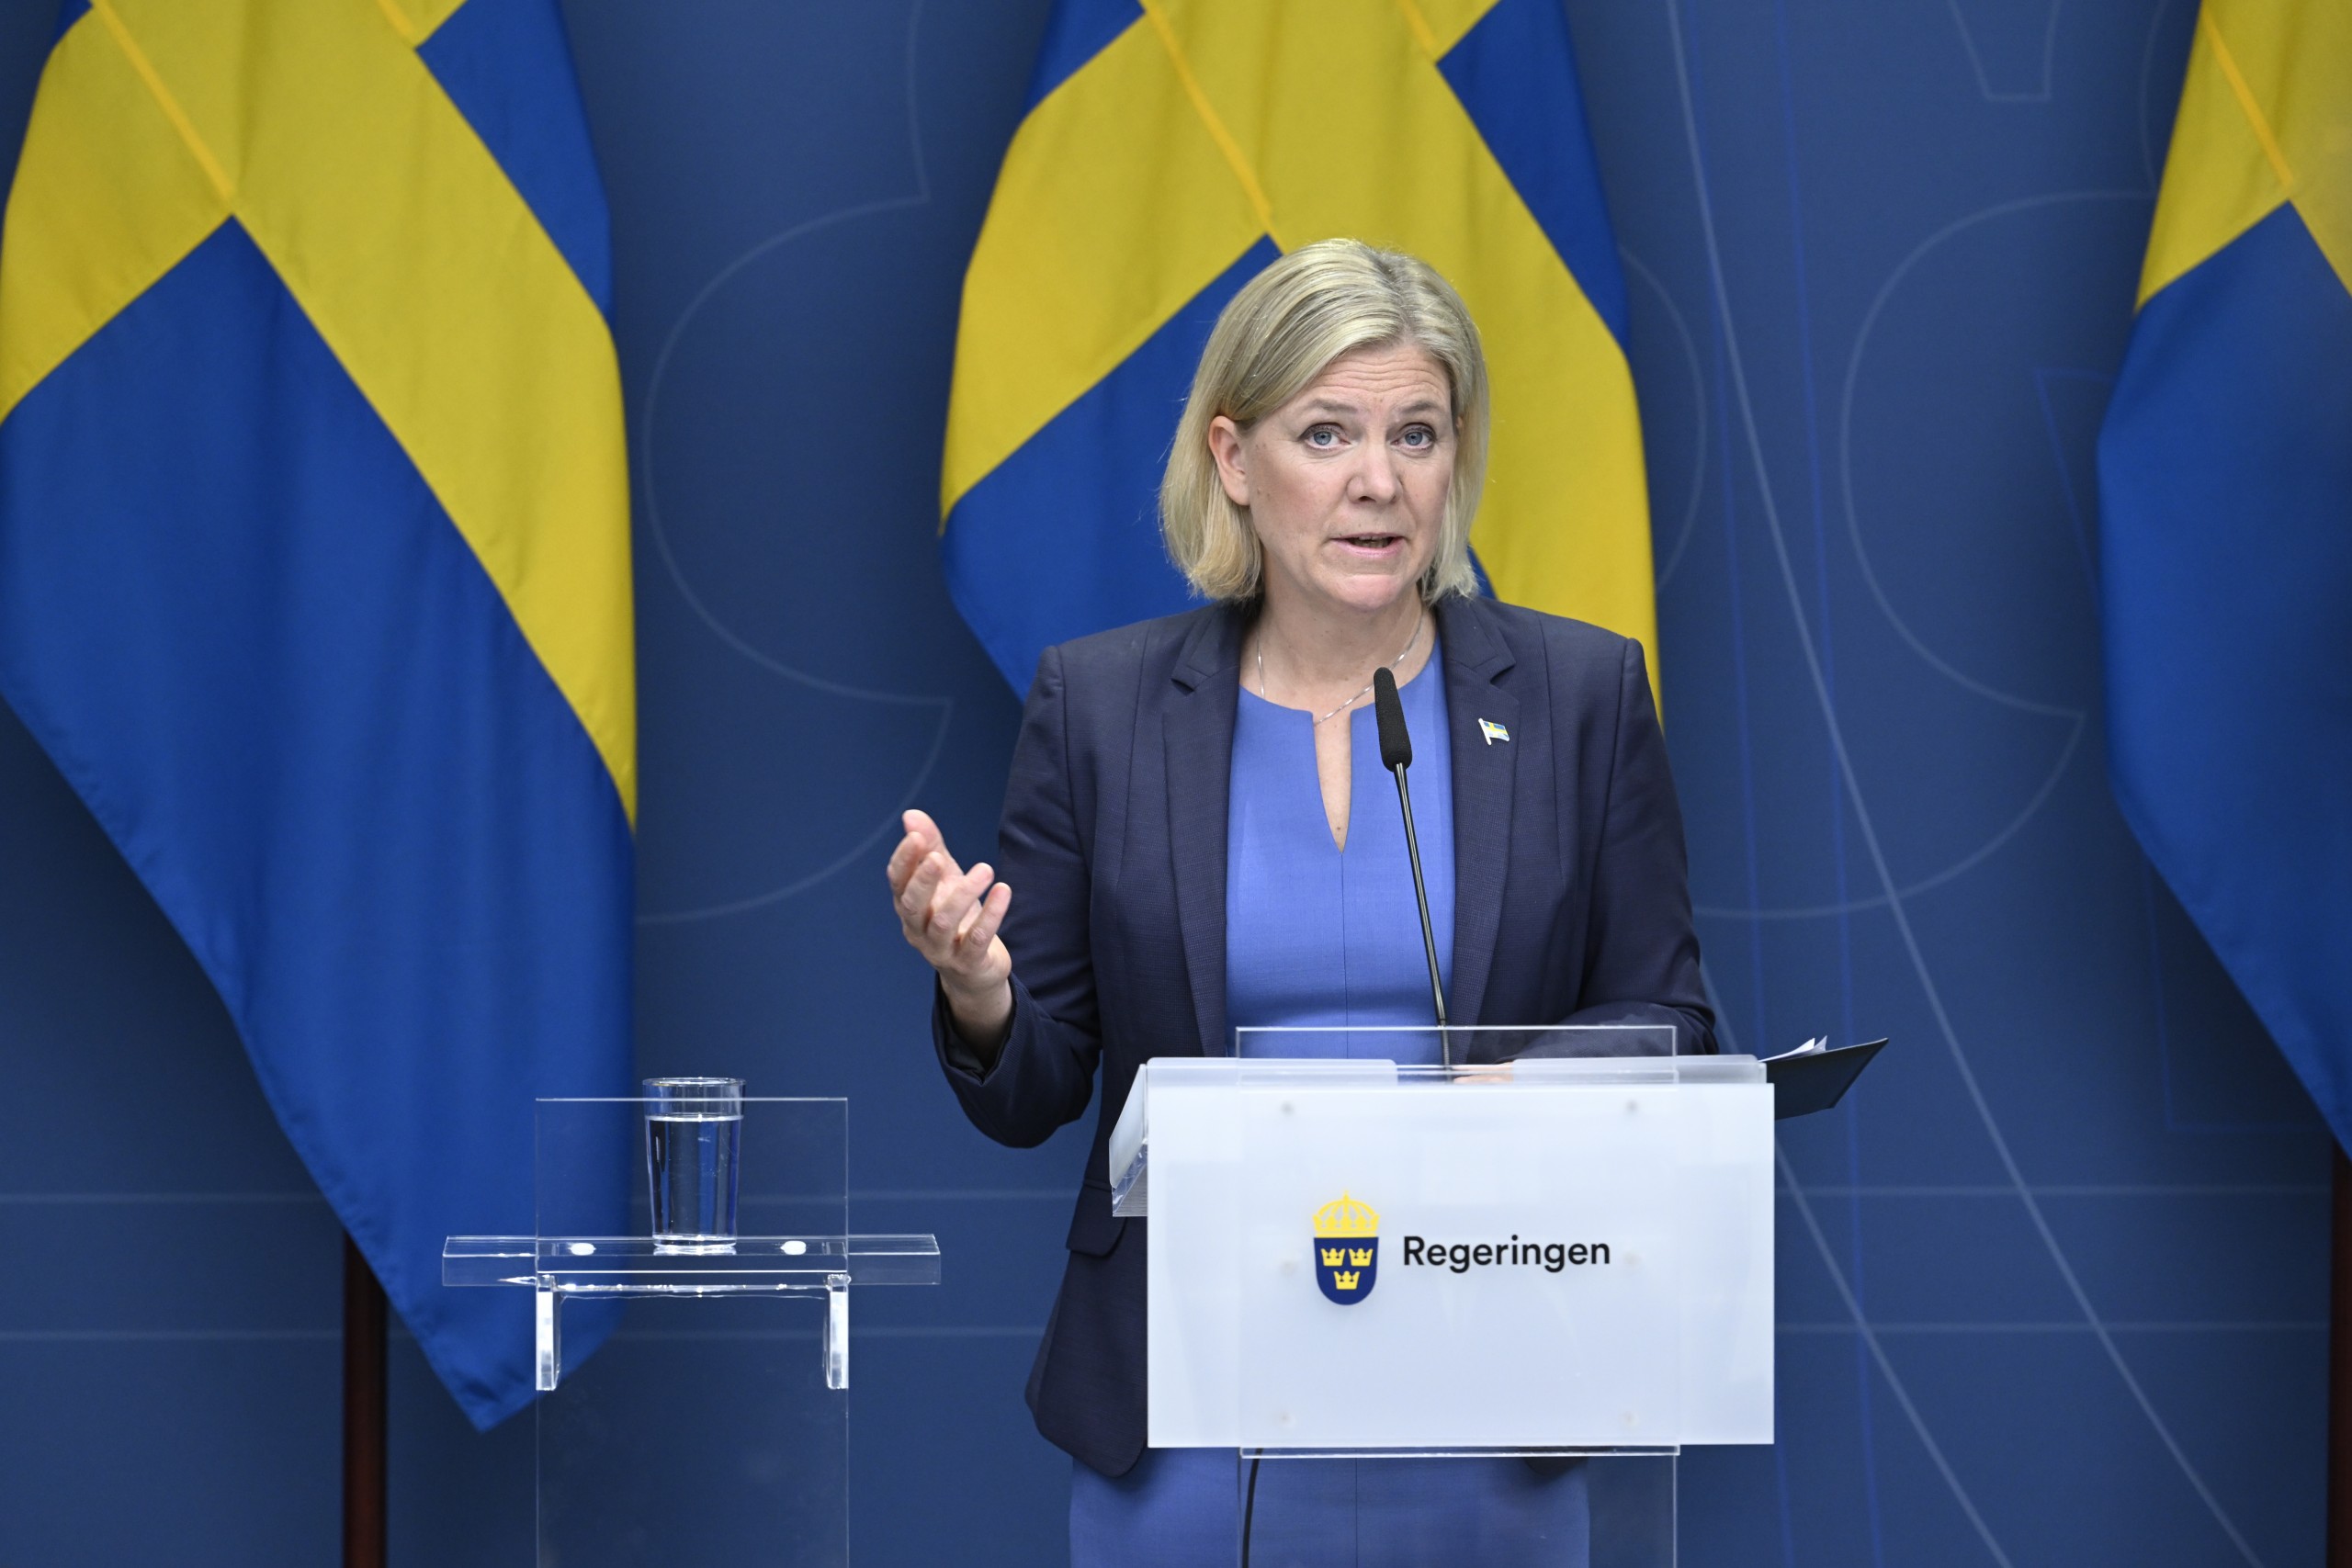 epa10184230 Sweden's Prime Minister Magdalena Andersson gives a news conference in Stockholm, Sweden, 14 September 2022. Andersson said she will resign, as final election results are near. Sweden held general elections on 11 September.  EPA/JESSICA GOW  SWEDEN OUT